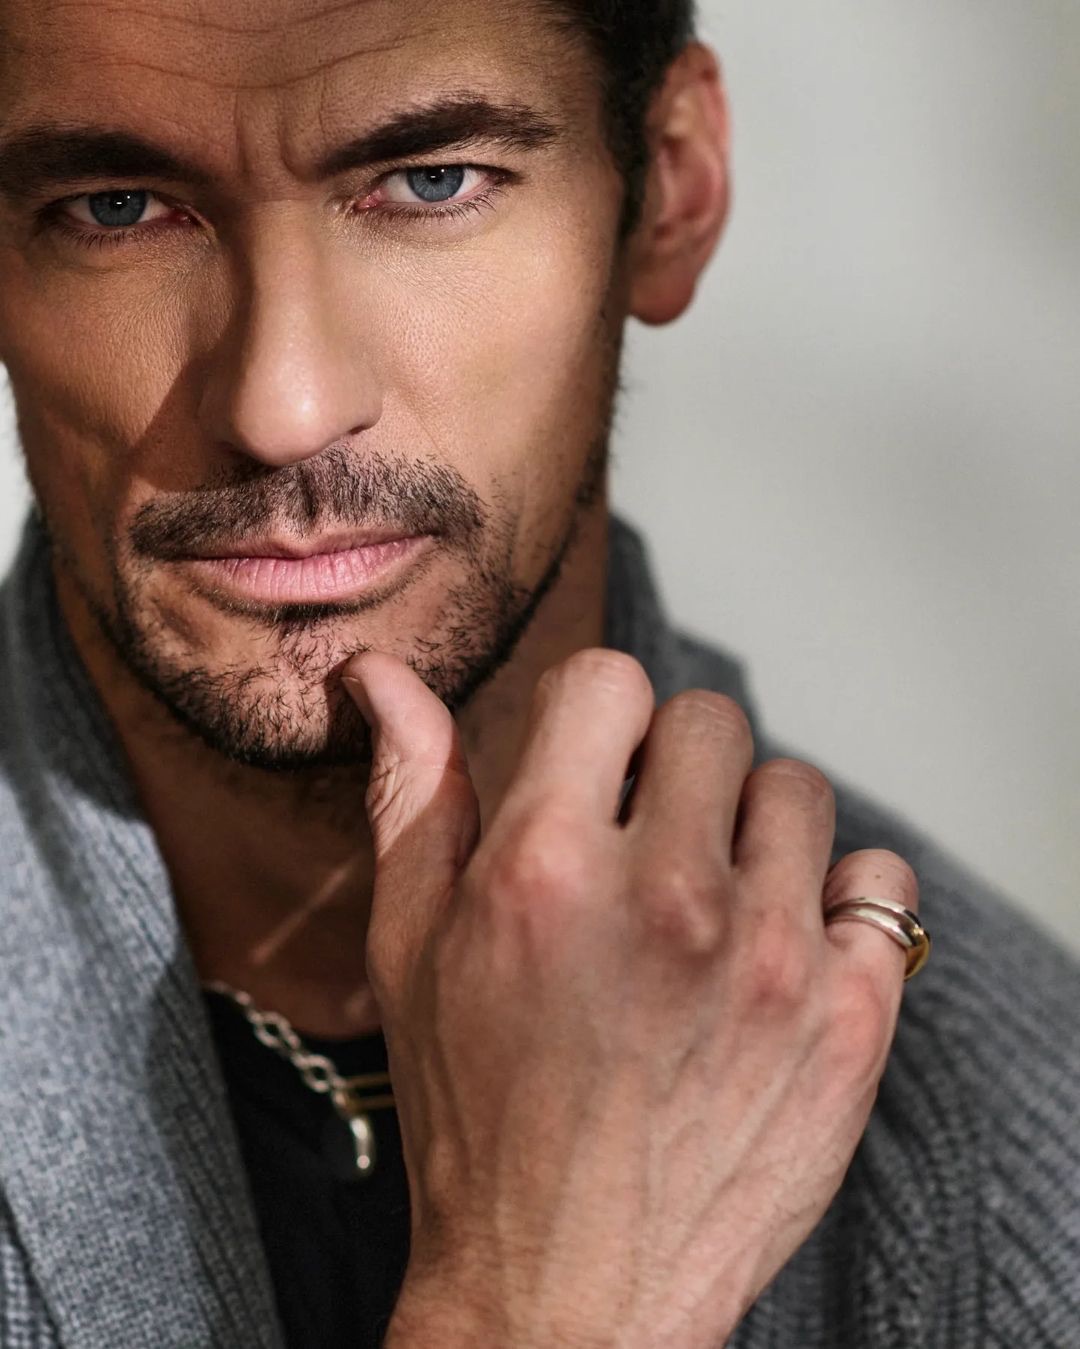 Discover the epitome of timeless elegance as we showcase the unparalleled charisma of global icon David Gandy in the August 2023 feature of The Rakish Gent. Unveil the essence of true sophistication and style through the lens of the world's foremost male model.